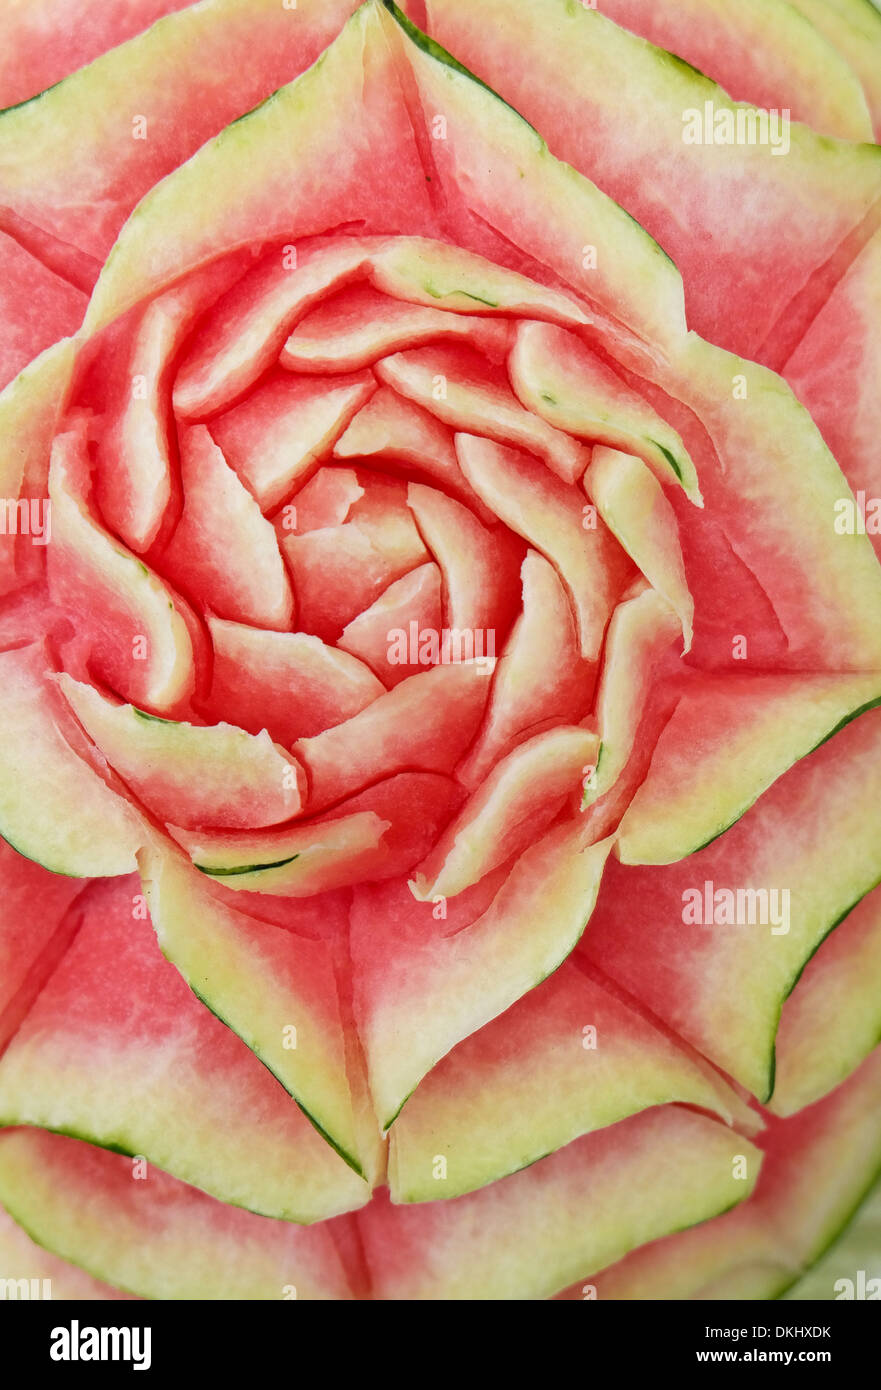 Melon carved into a flower shape Stock Photo